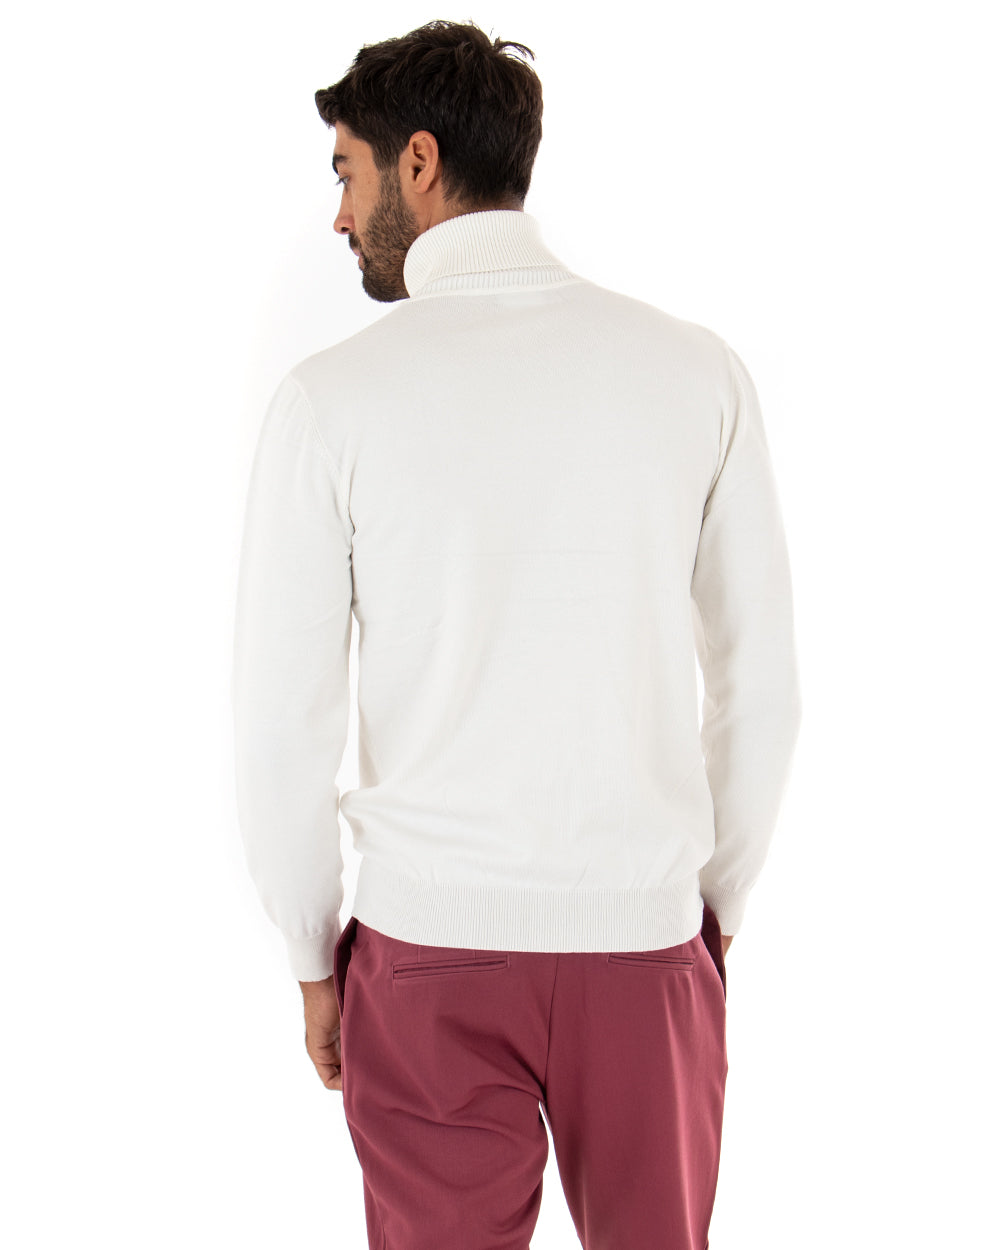 Men's Sweater Long Sleeves Elastic High Neck Solid Color White GIOSAL M2550A